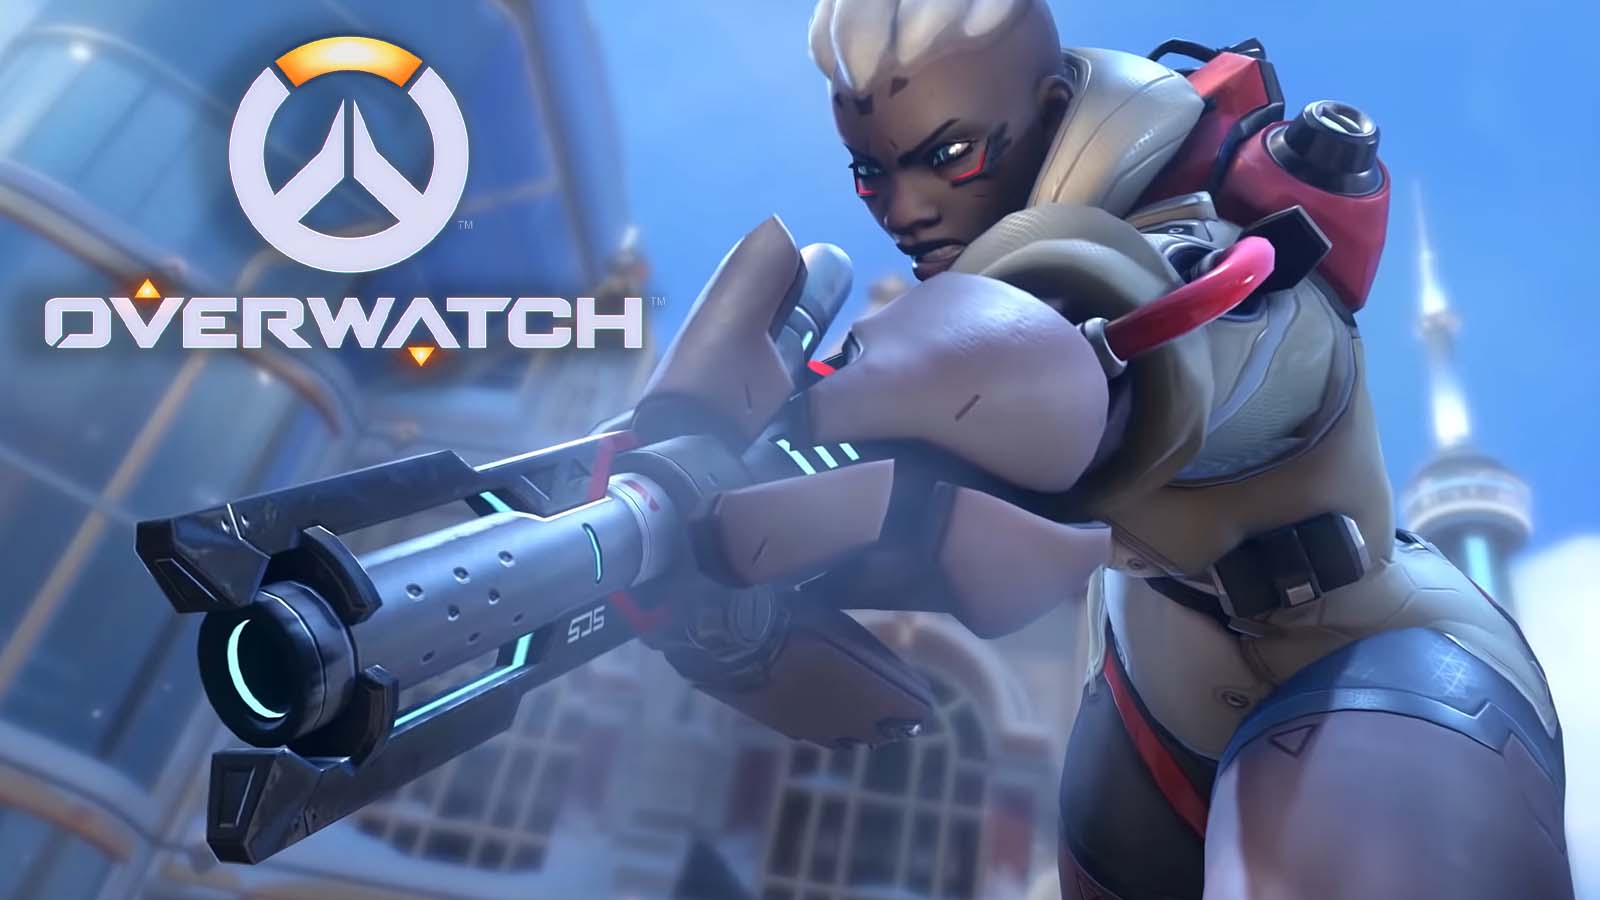 Overwatch dev teases new heroes finally coming in 2022, sequel or not